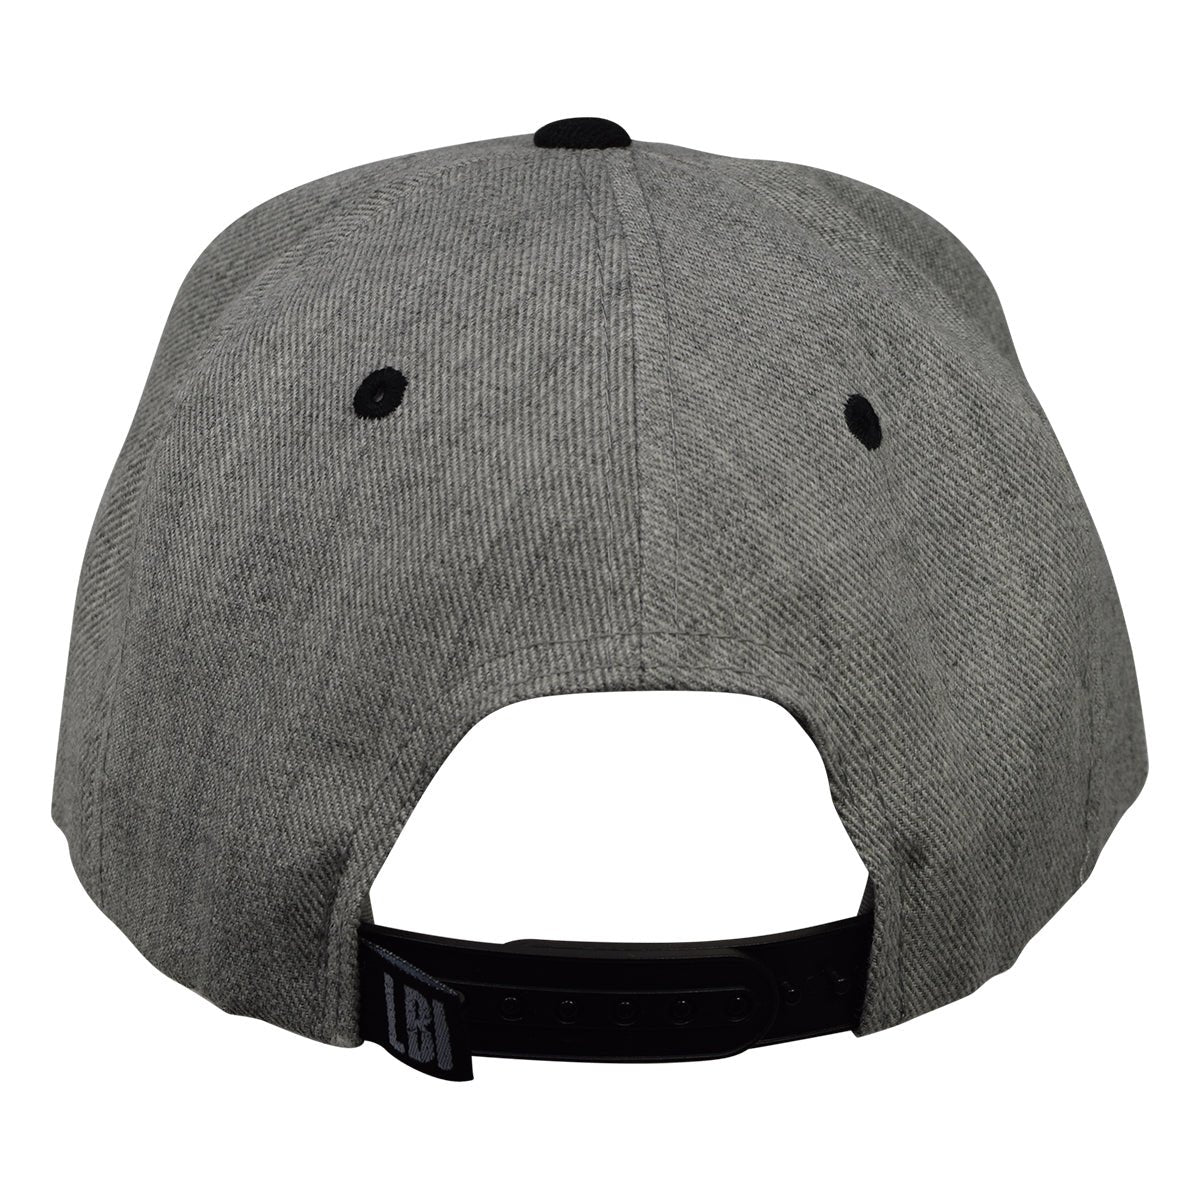 Las Vegas Snapback Hat by LET'S BE IRIE - Heather Gray and Black - Let's Be Irie™